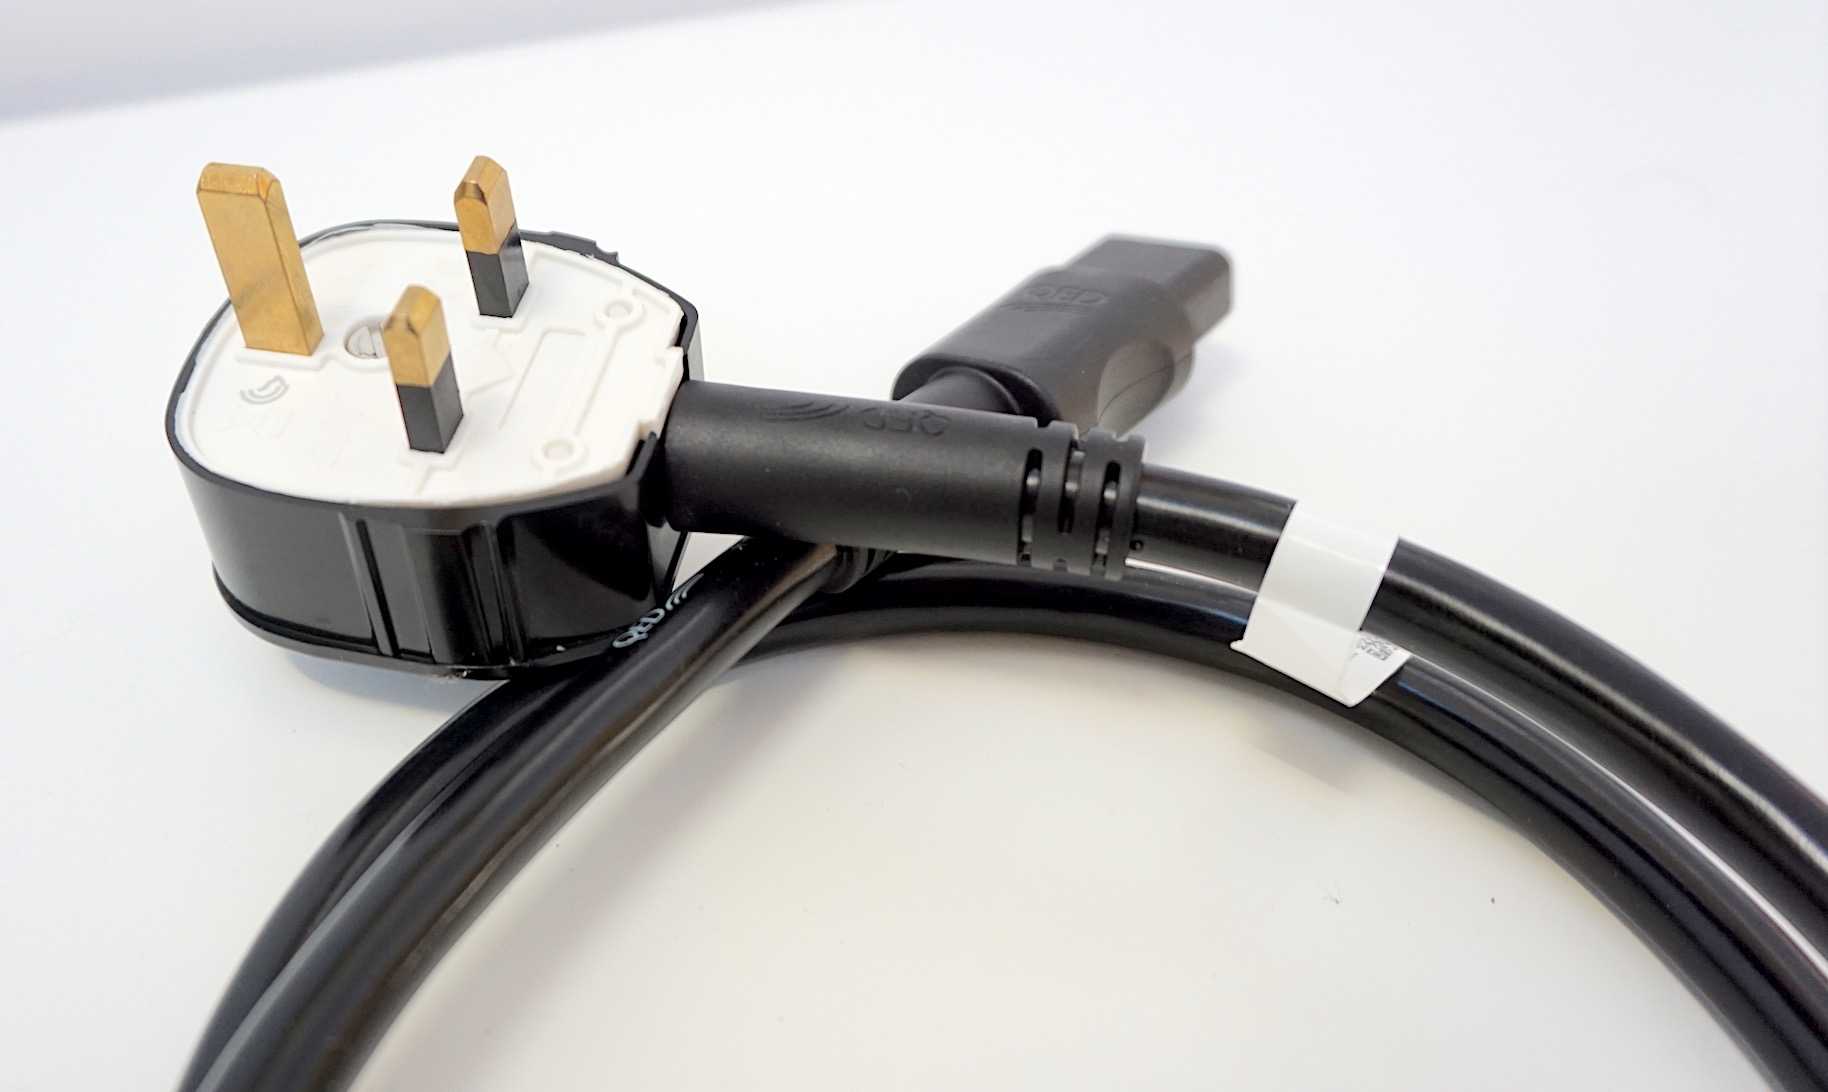 XT3 MAINS CABLE FROM QED